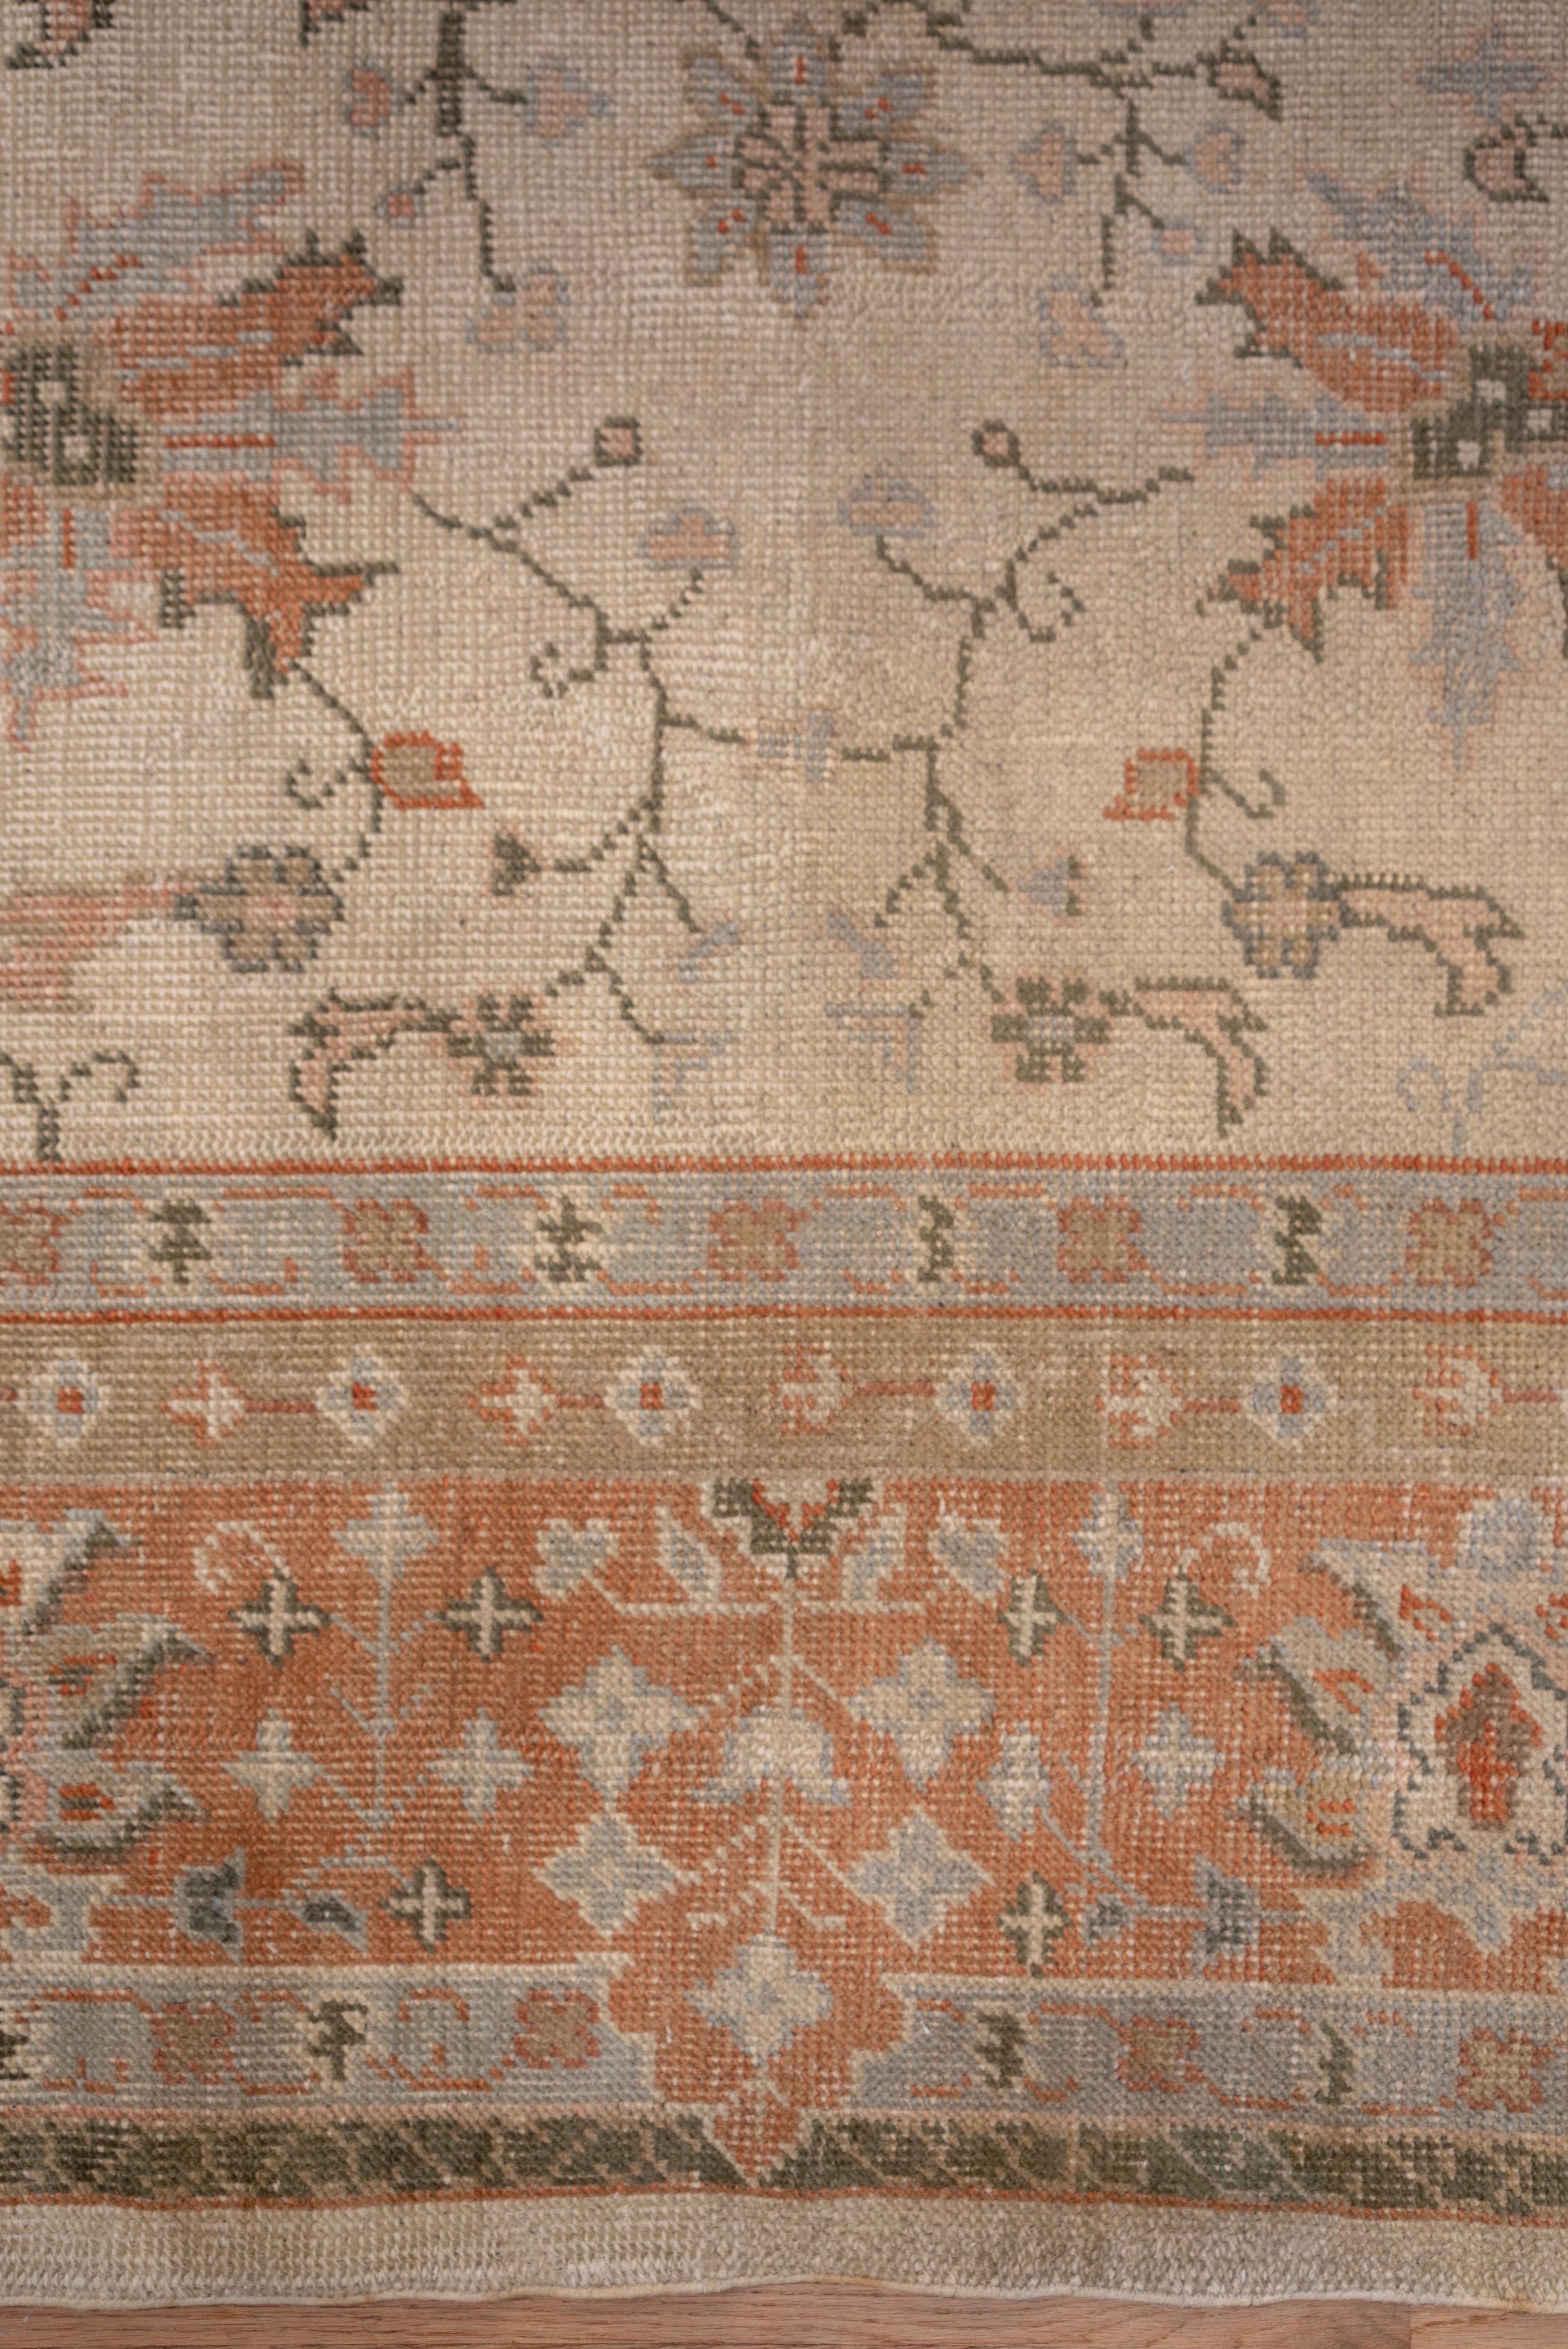 This cotton warp, west Anatolian oversize town carpet with all-over even wear features a light salmon palmette and flower partially broken main border framing the ivory eggshell field with extended pale green corners. The ivory eggshell field is